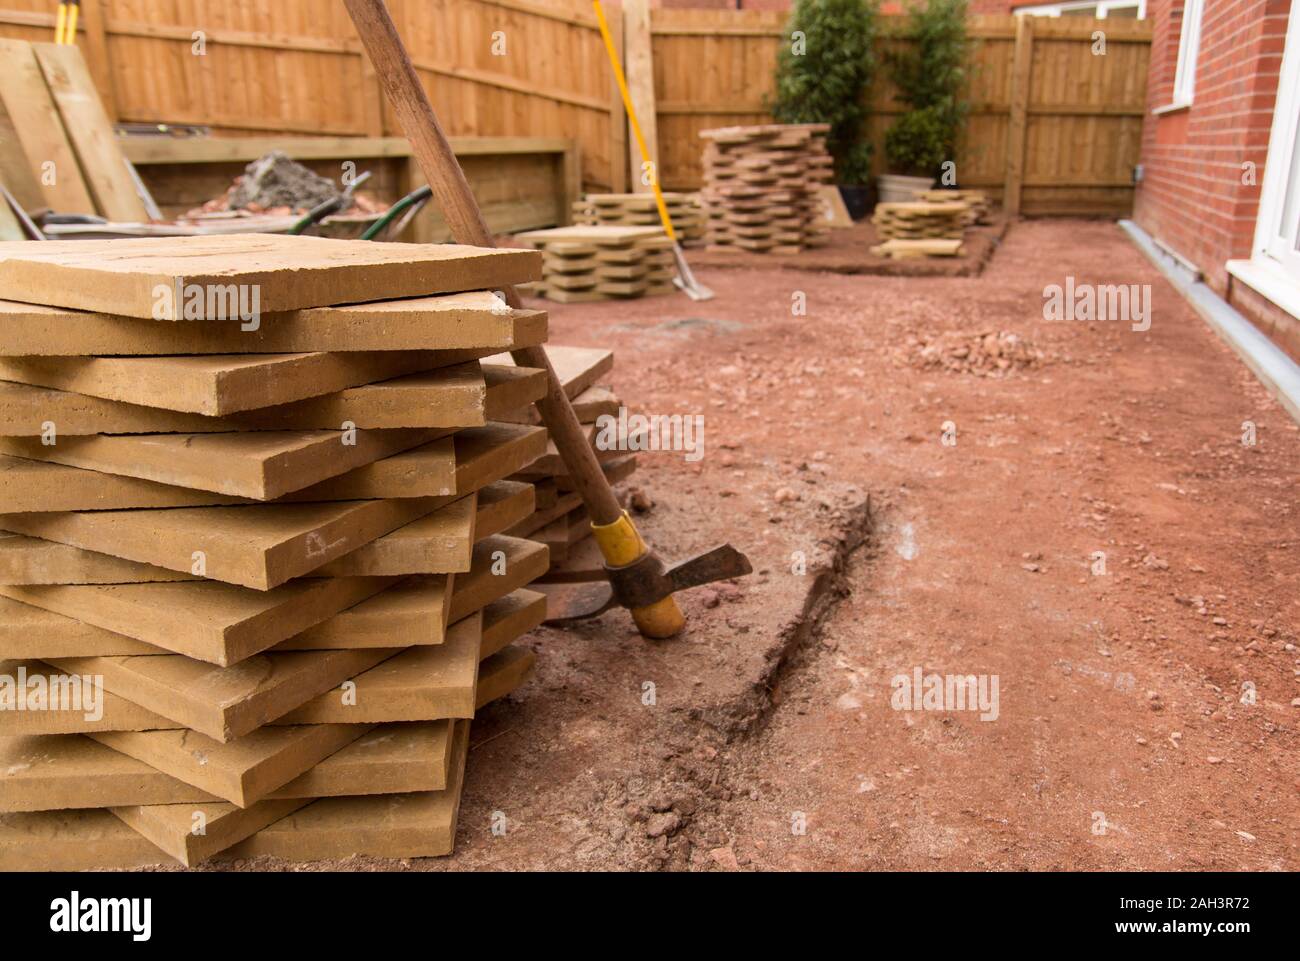 Paving slabs stacked landscaping garden Stock Photo